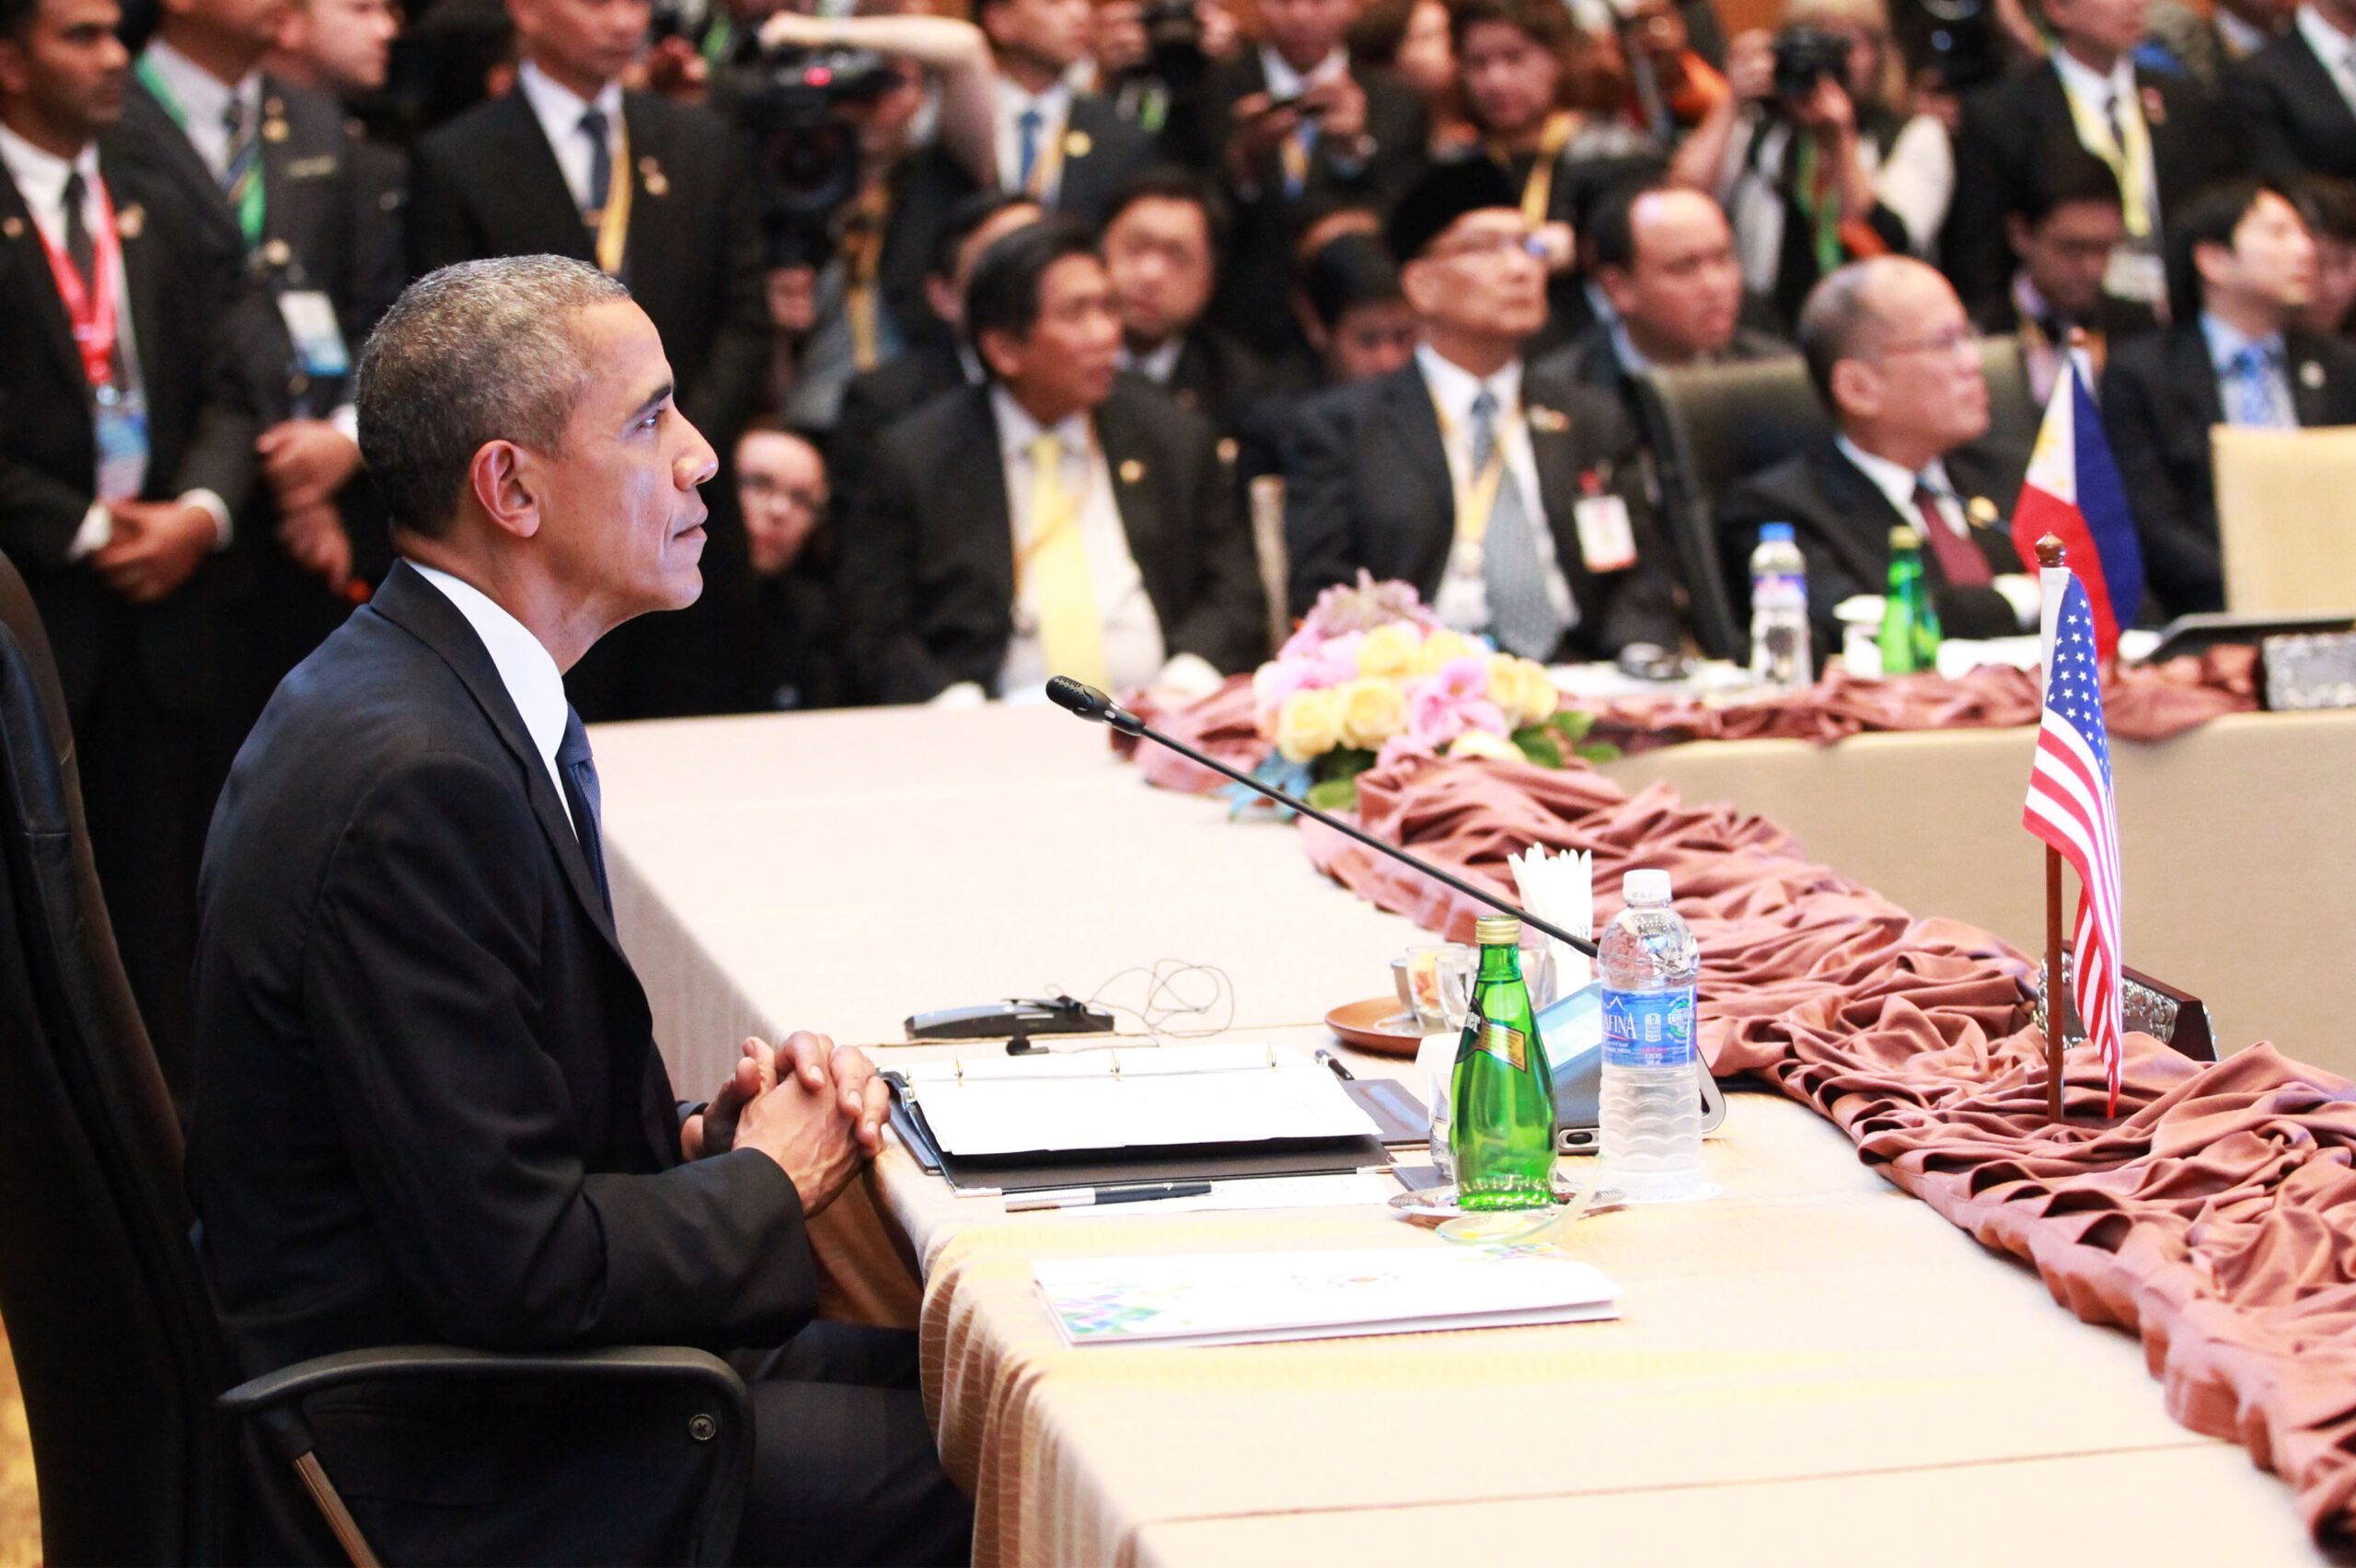 Obama to host ASEAN leaders next year